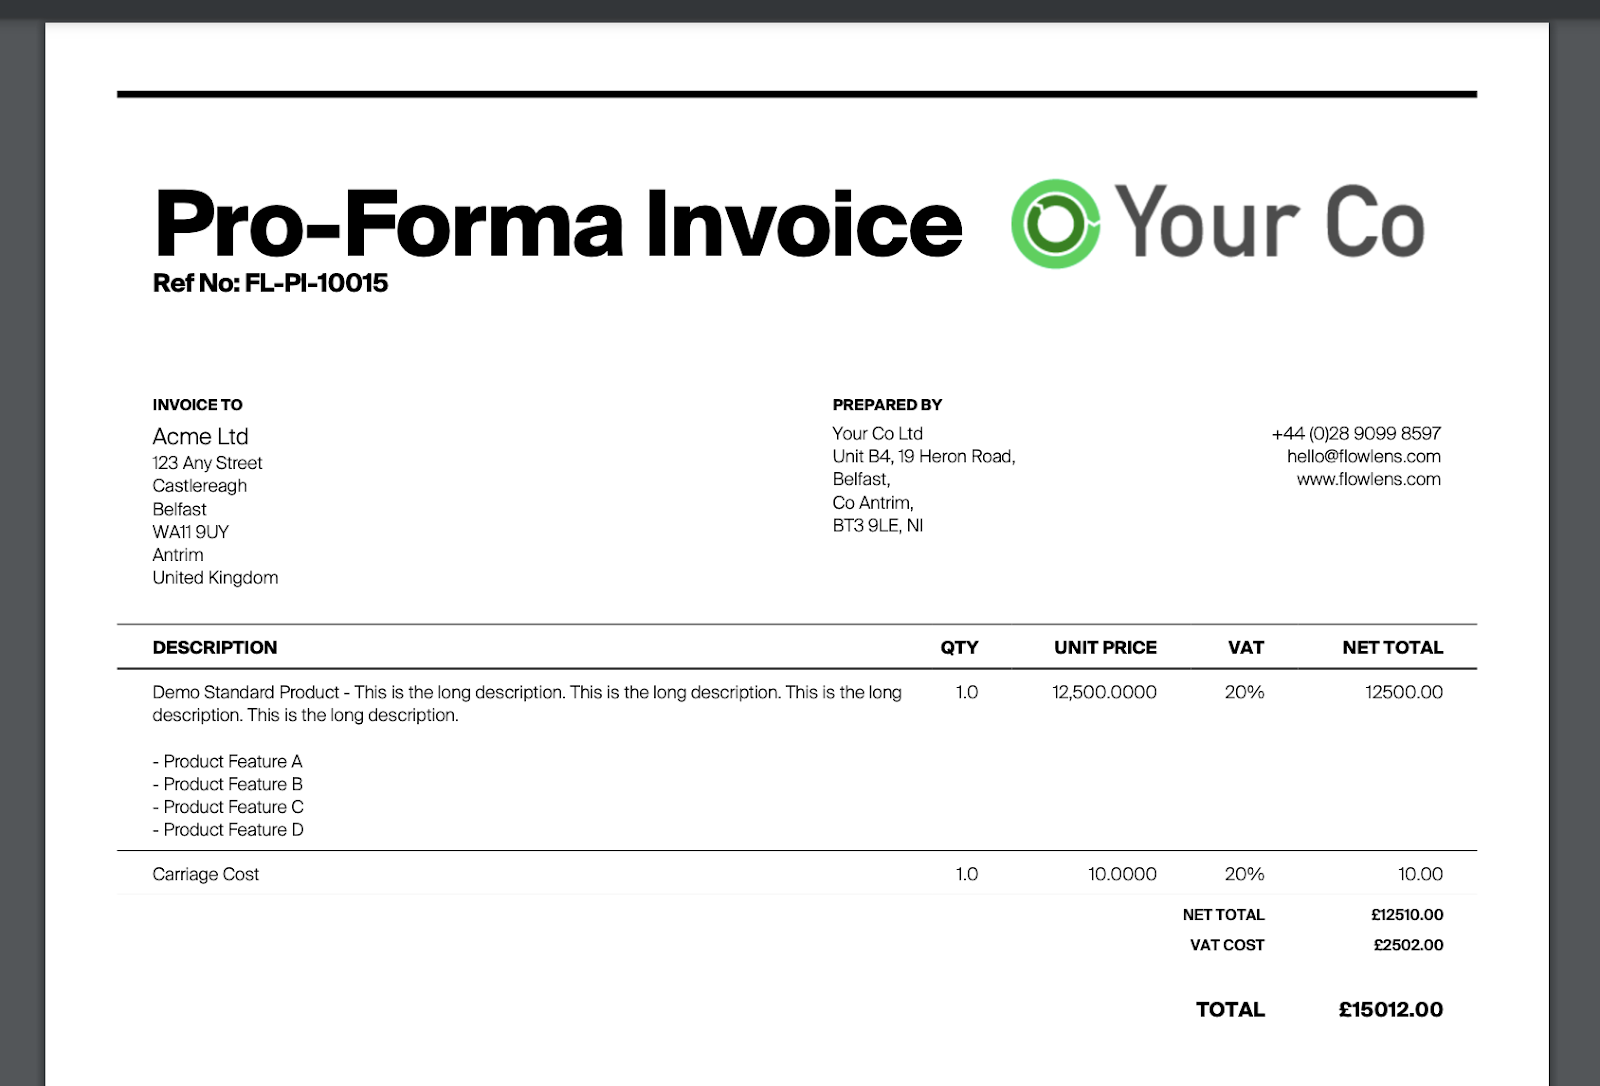 Flowlens Pro-Forma invoice example works with Xero, QuickBooks Online and Sage 50.